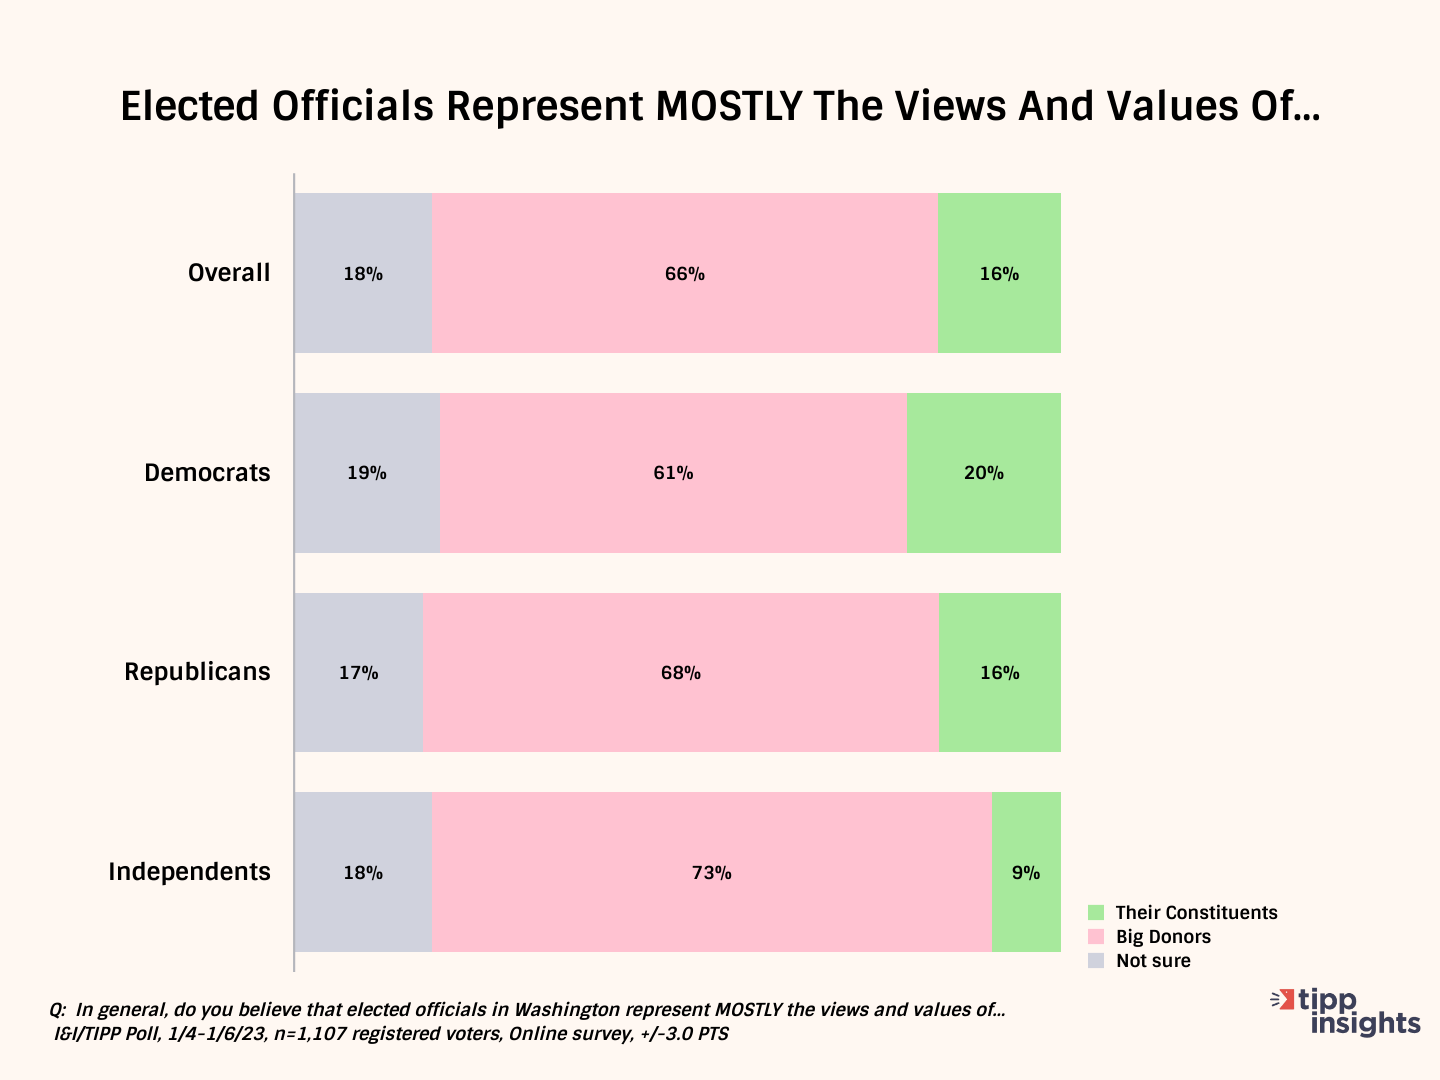 Elected Officials No Longer Reflect Views, Values Of Average Voters: I&I/TIPP Poll